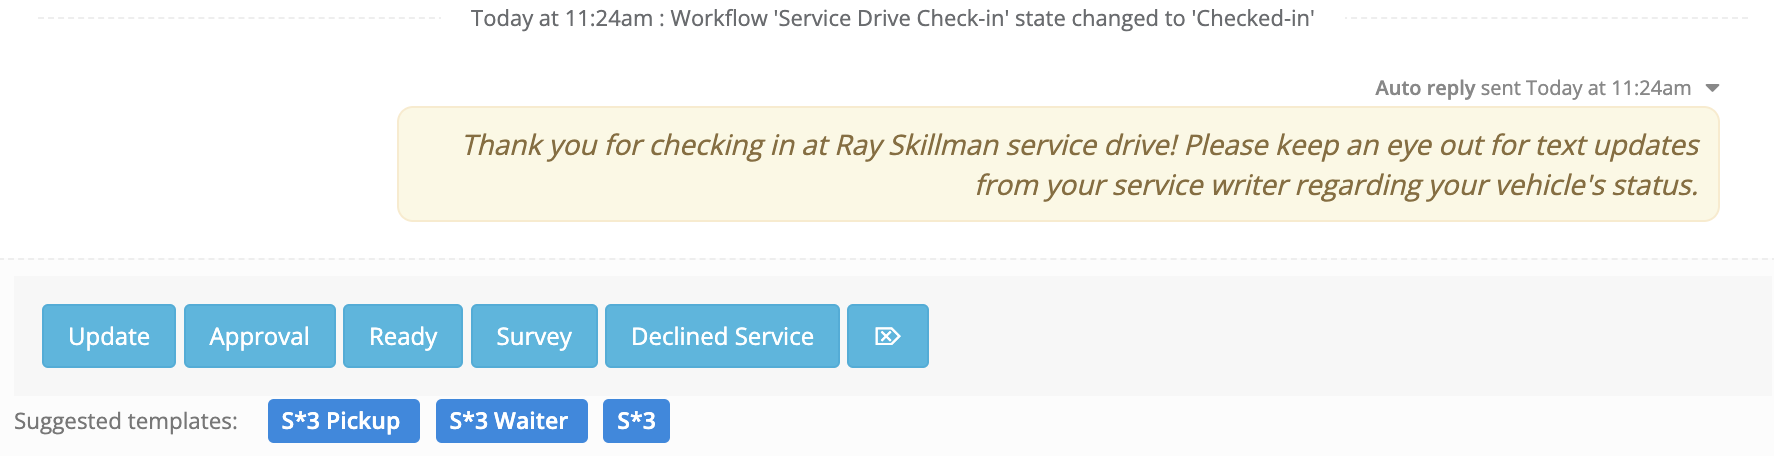 Captivated service check-in workflow example